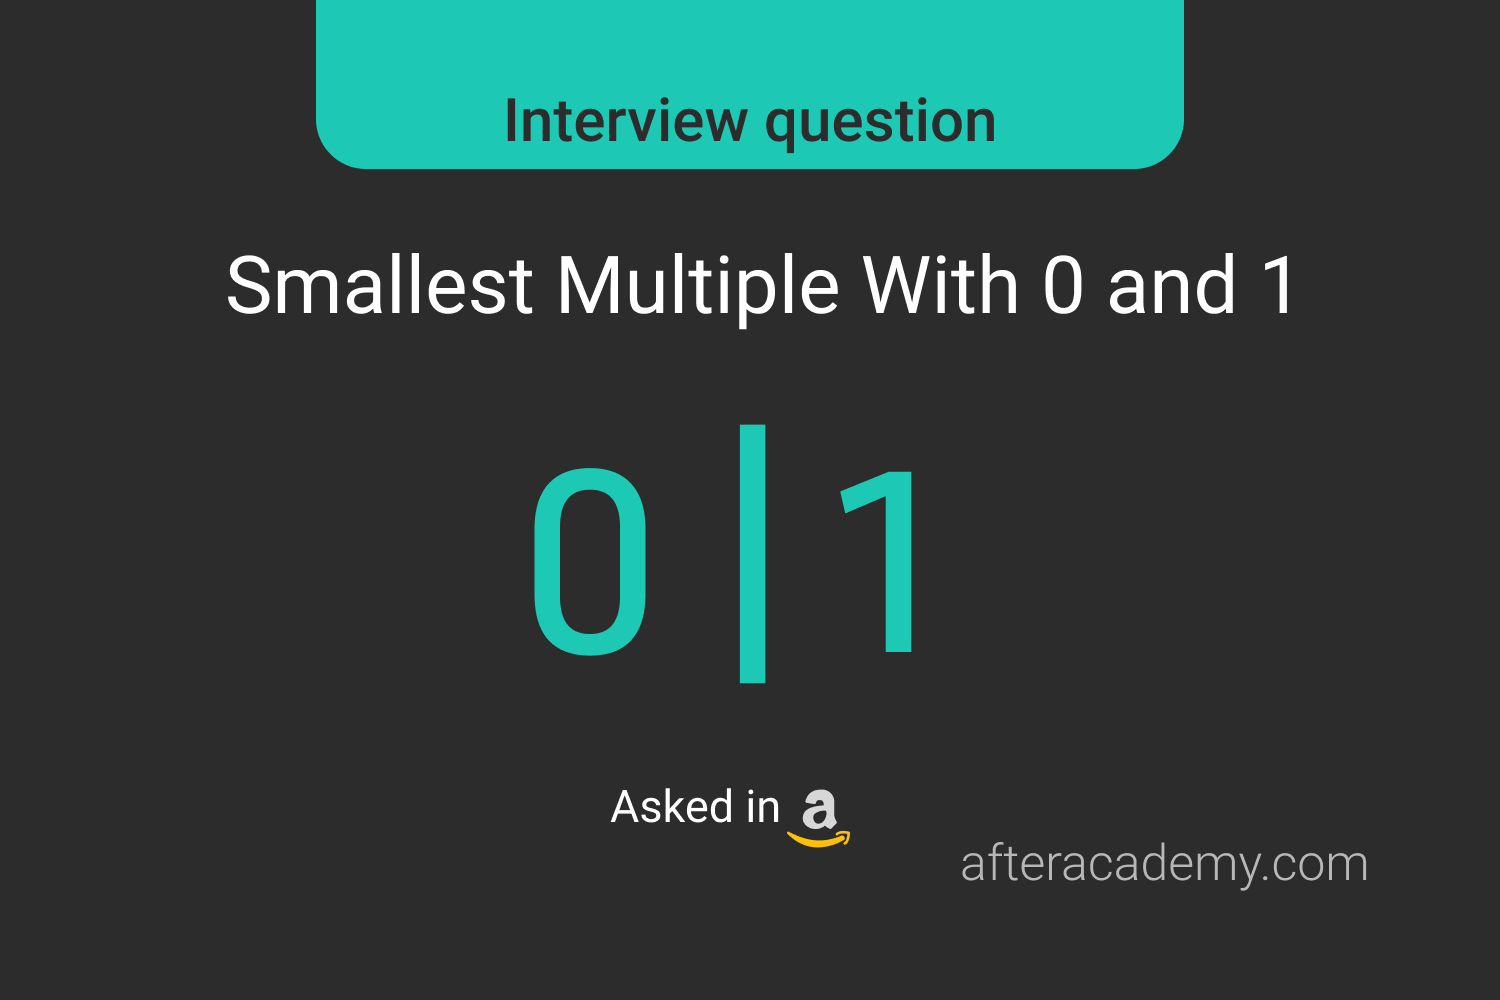 Smallest Multiple With 0s and 1s